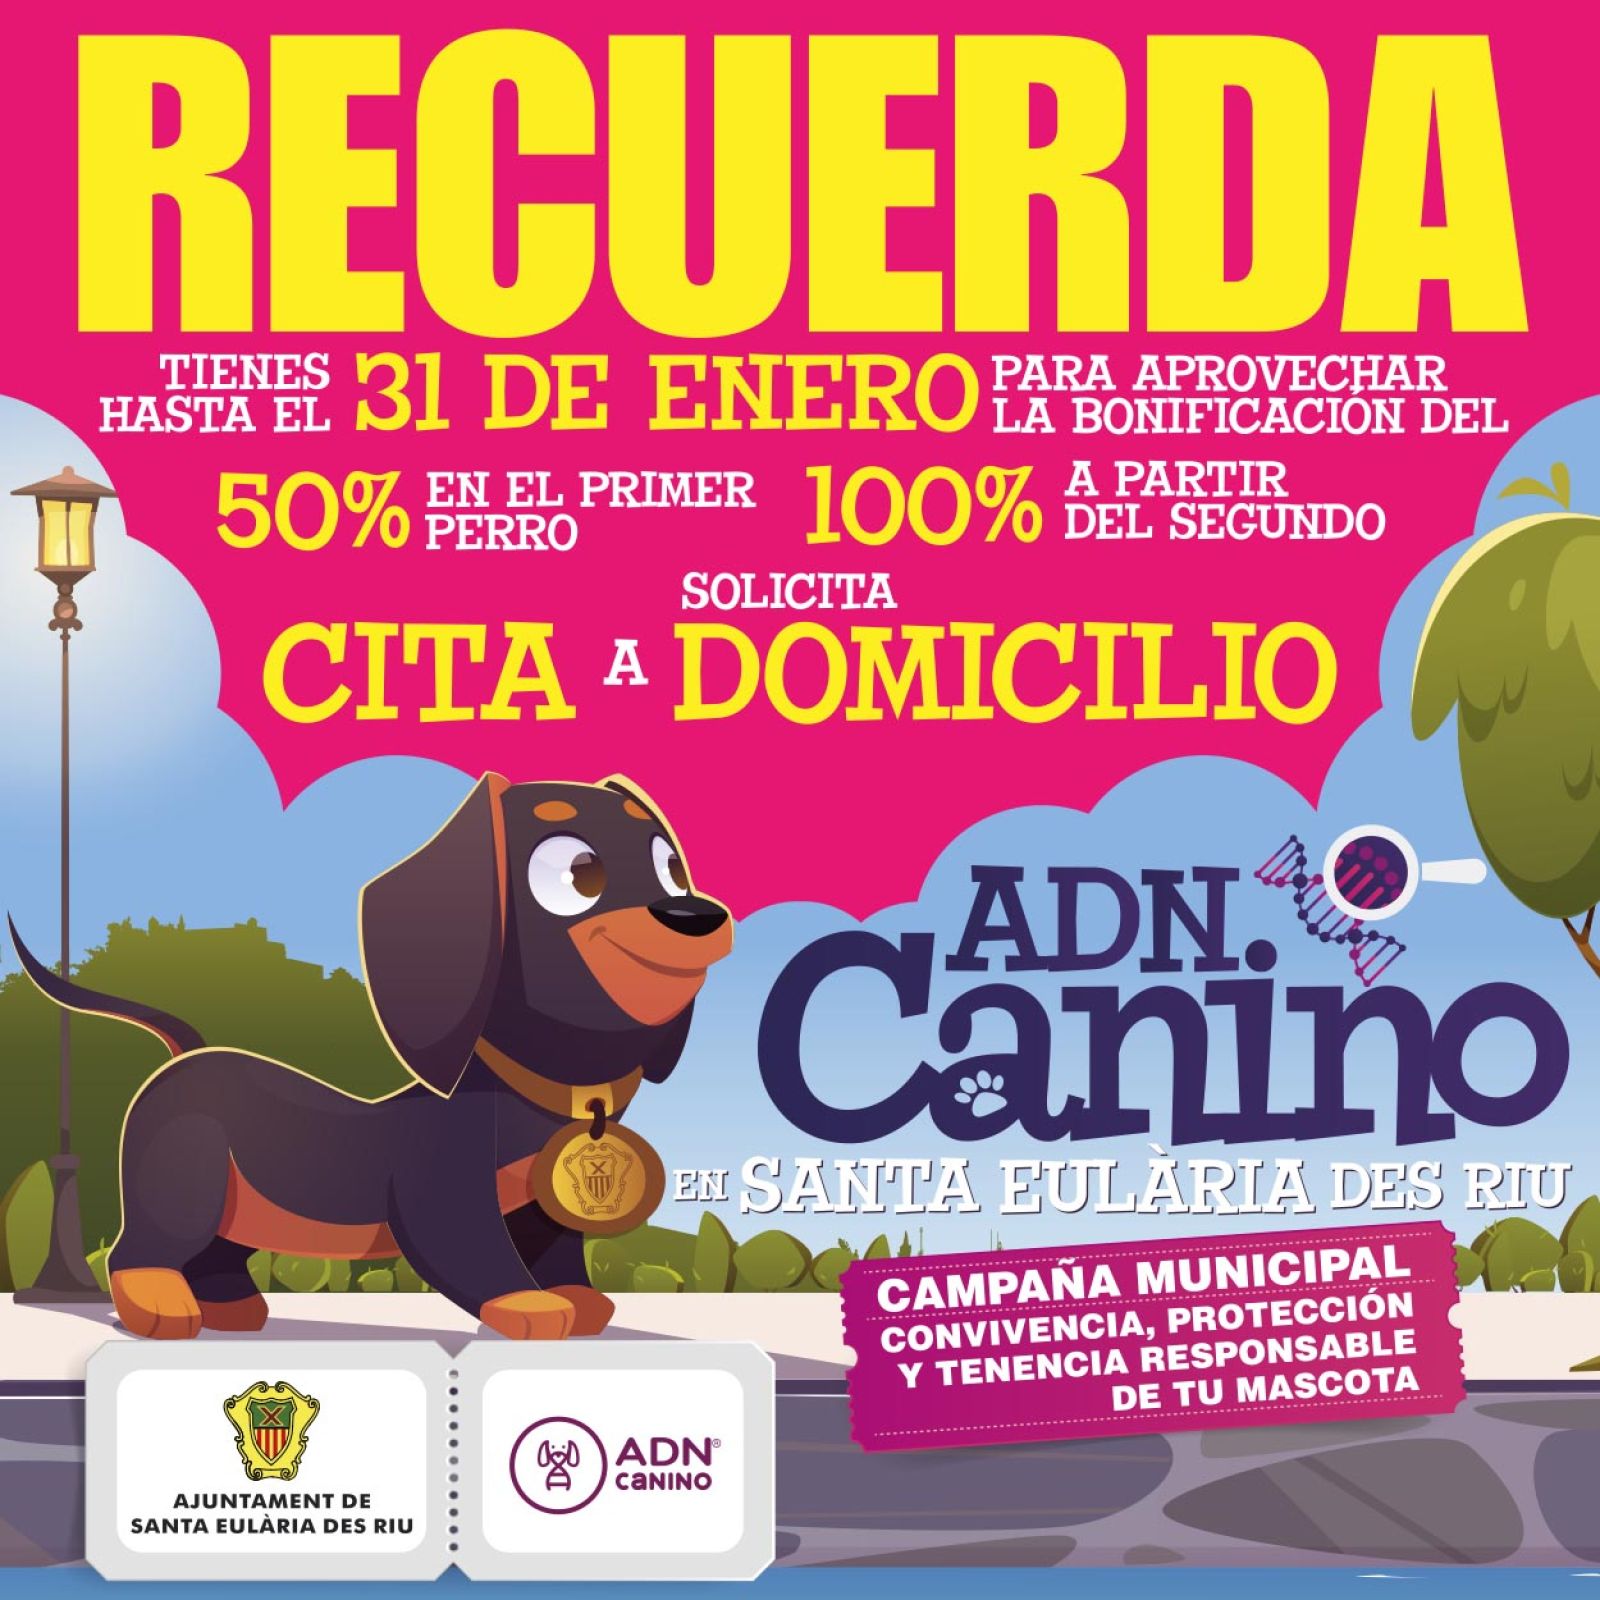 Santa Eulària des Riu approaches a thousand dogs in the municipal canine DNA genetic census system